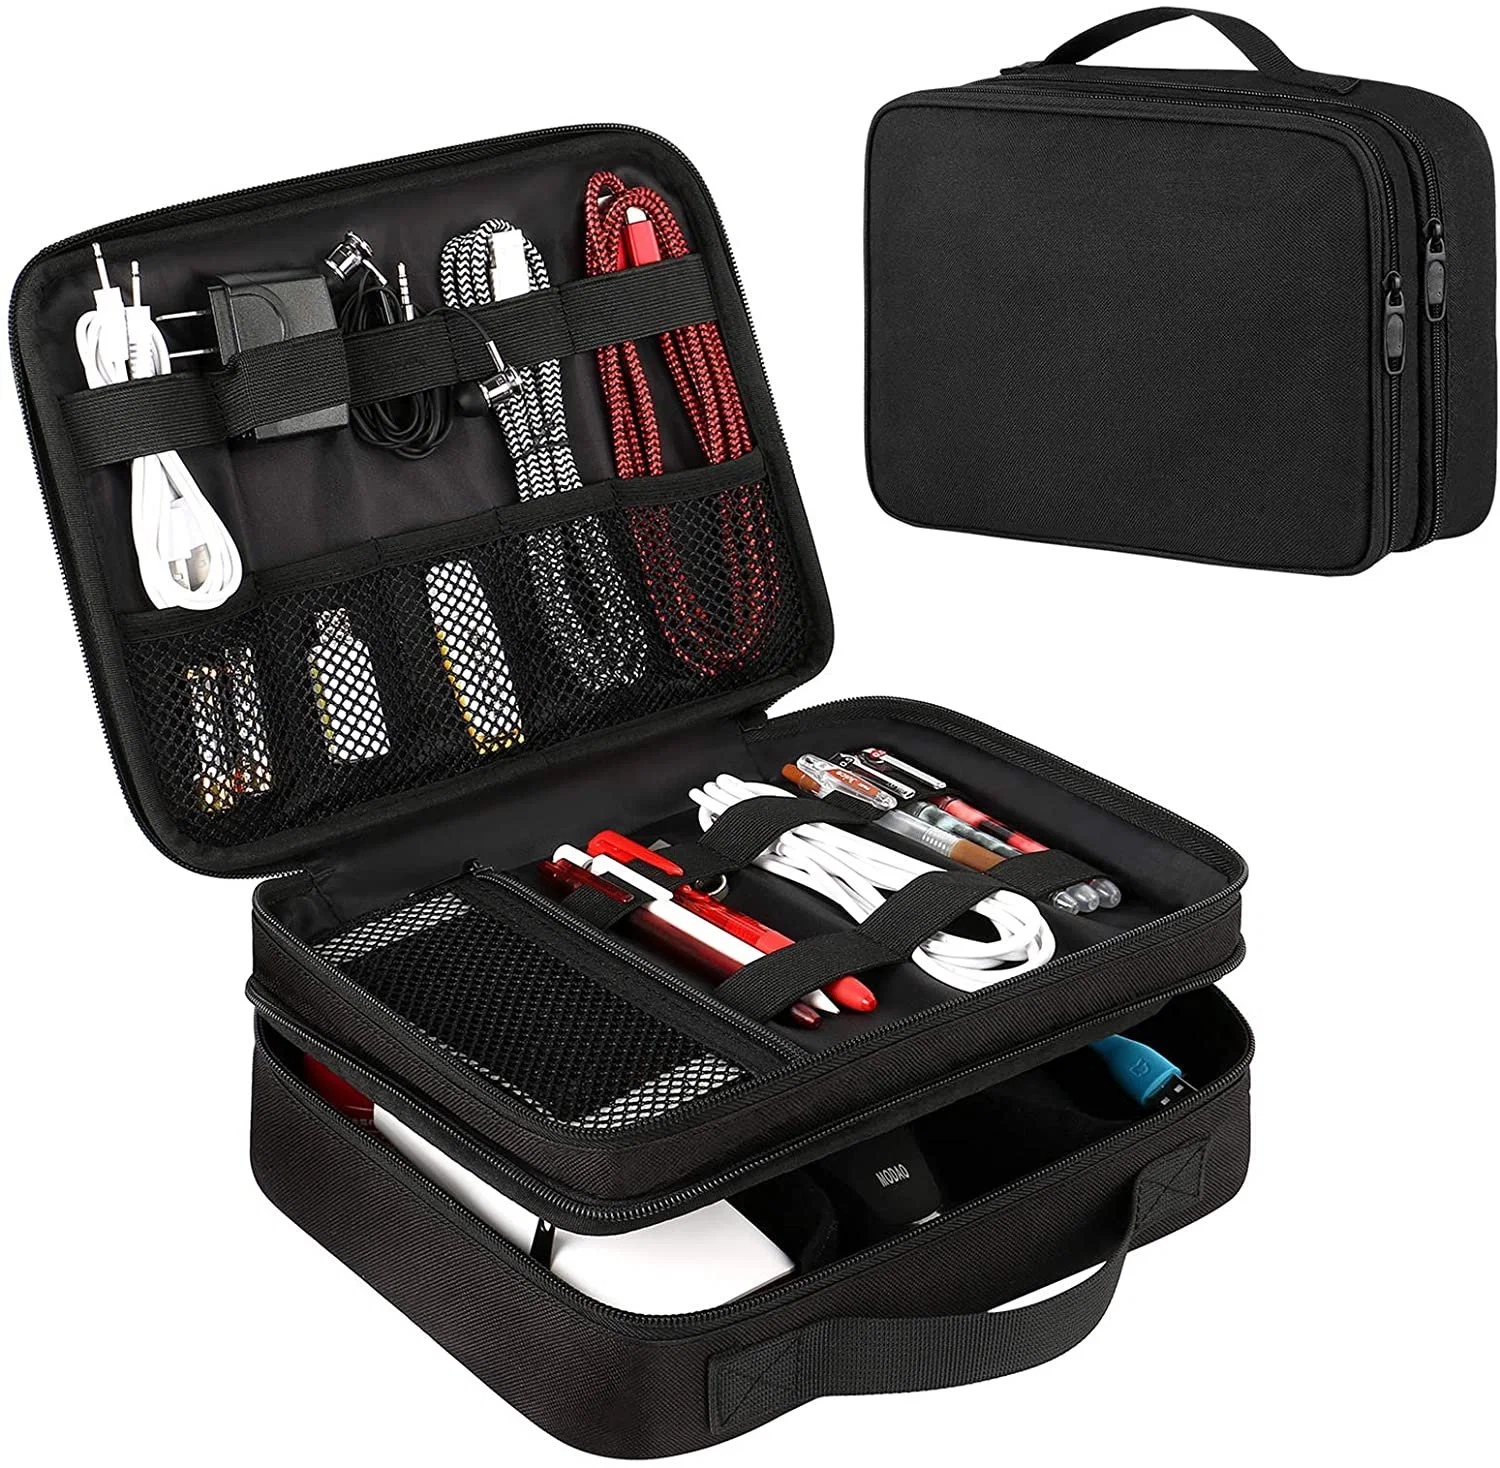 Portable Tech Electronics Travel Organizer Accessories Case Gifts for Men Cable Storage Bag